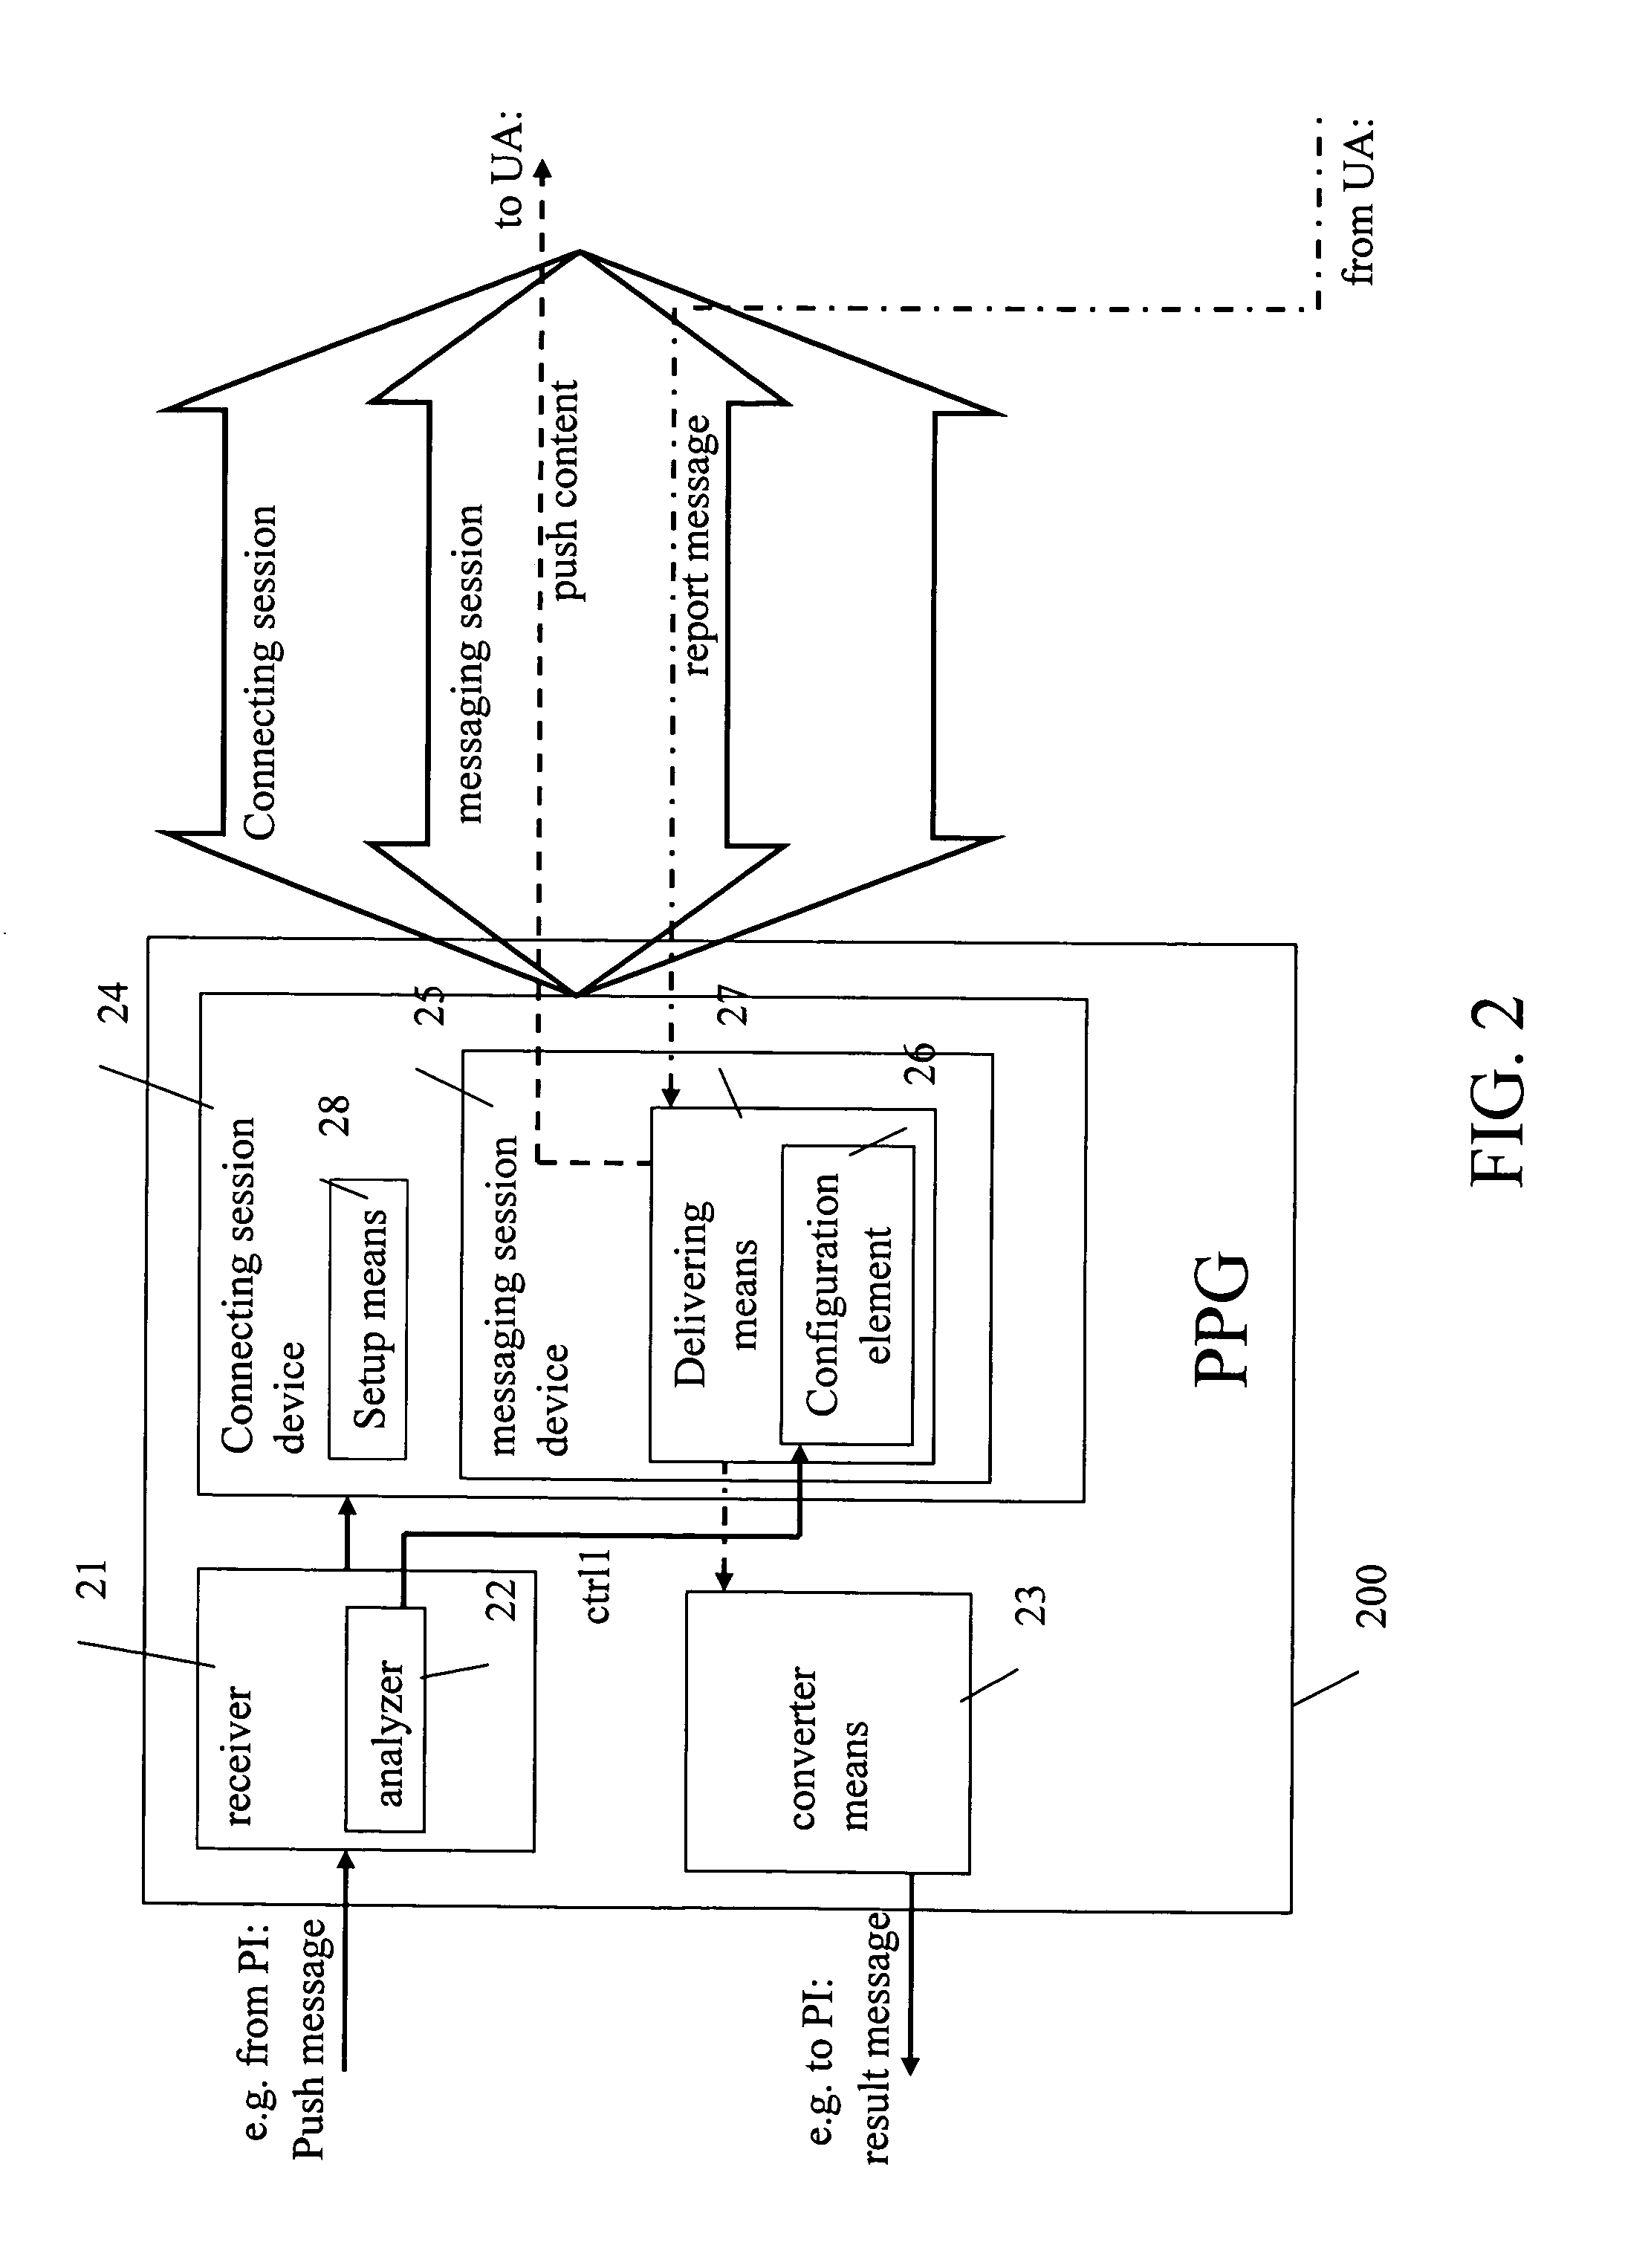 Method and entities for performing a push session in a communication system